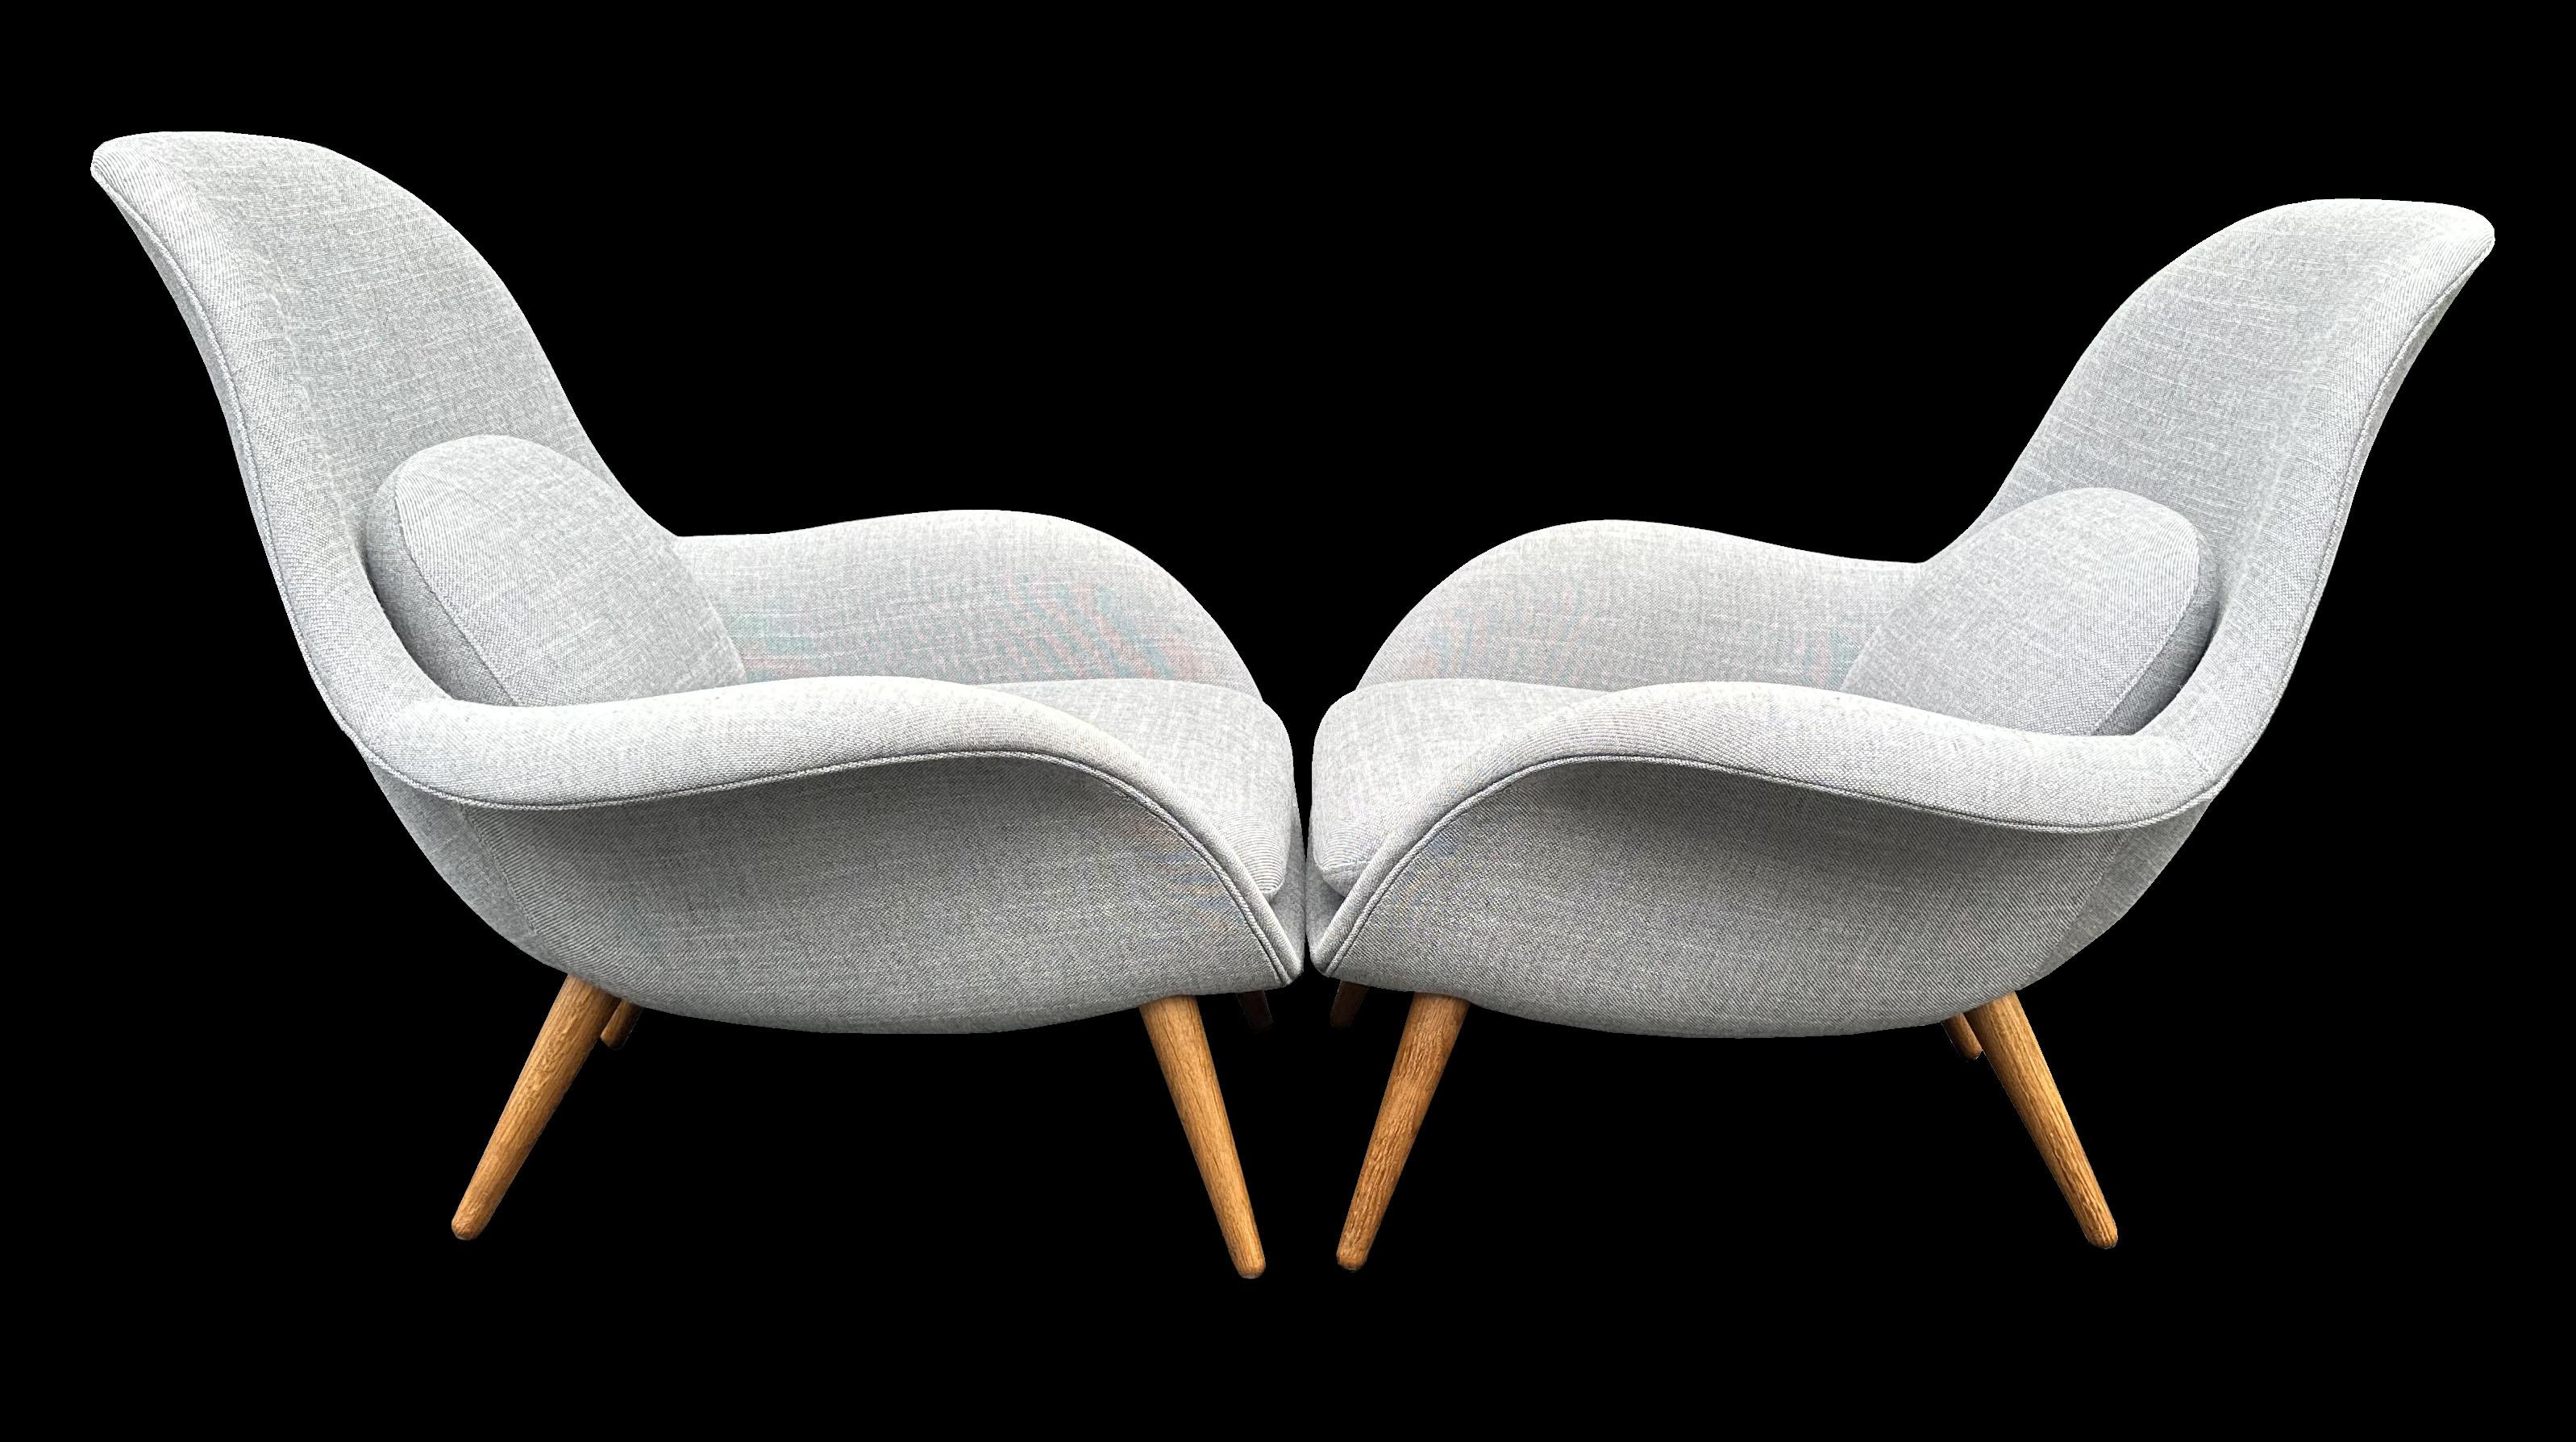 We have 2 pairs of these very cool Danish designed Lounge chairs in light grey original fabric in great condition, no wear or stains. They are on solid Oak legs which are demountable to allow for more economical shipping. The seat cushion and back